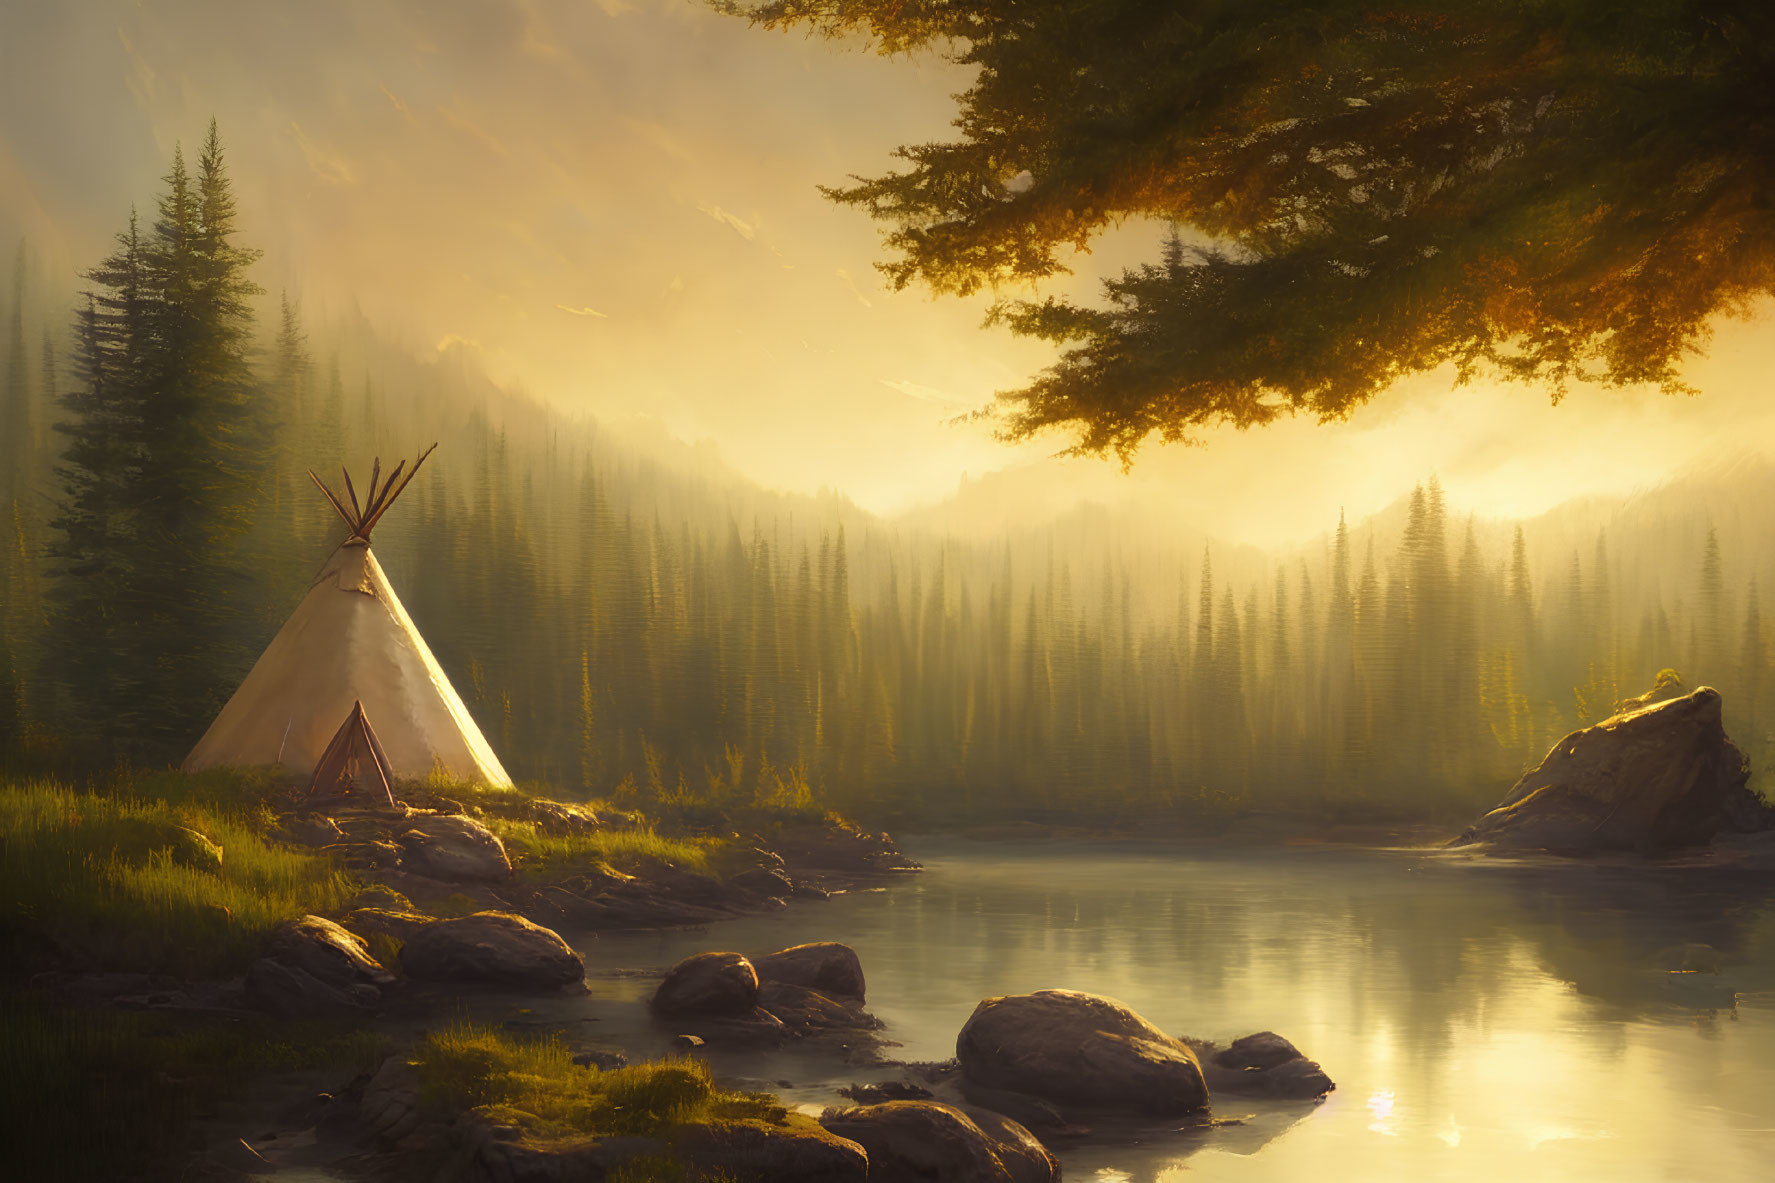 Tranquil Teepee Scene by Calm River and Forest